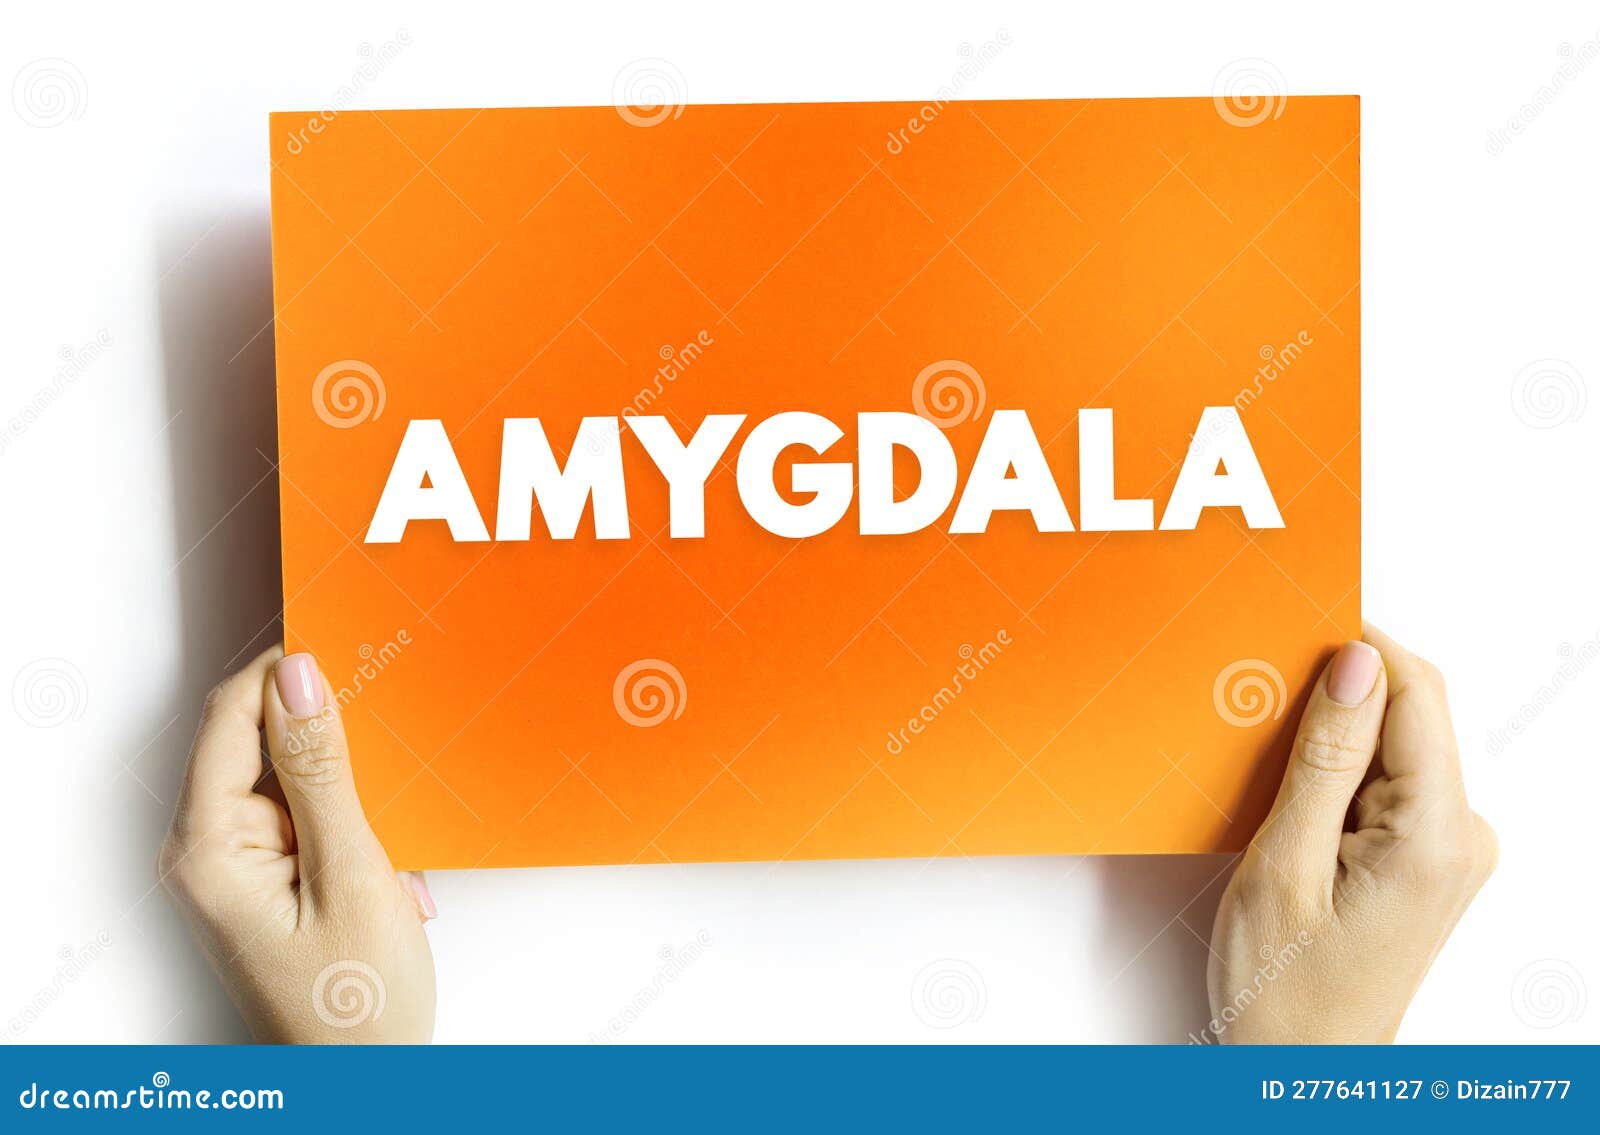 amygdala is the integrative center for emotions, emotional behavior, and motivation, text concept on card